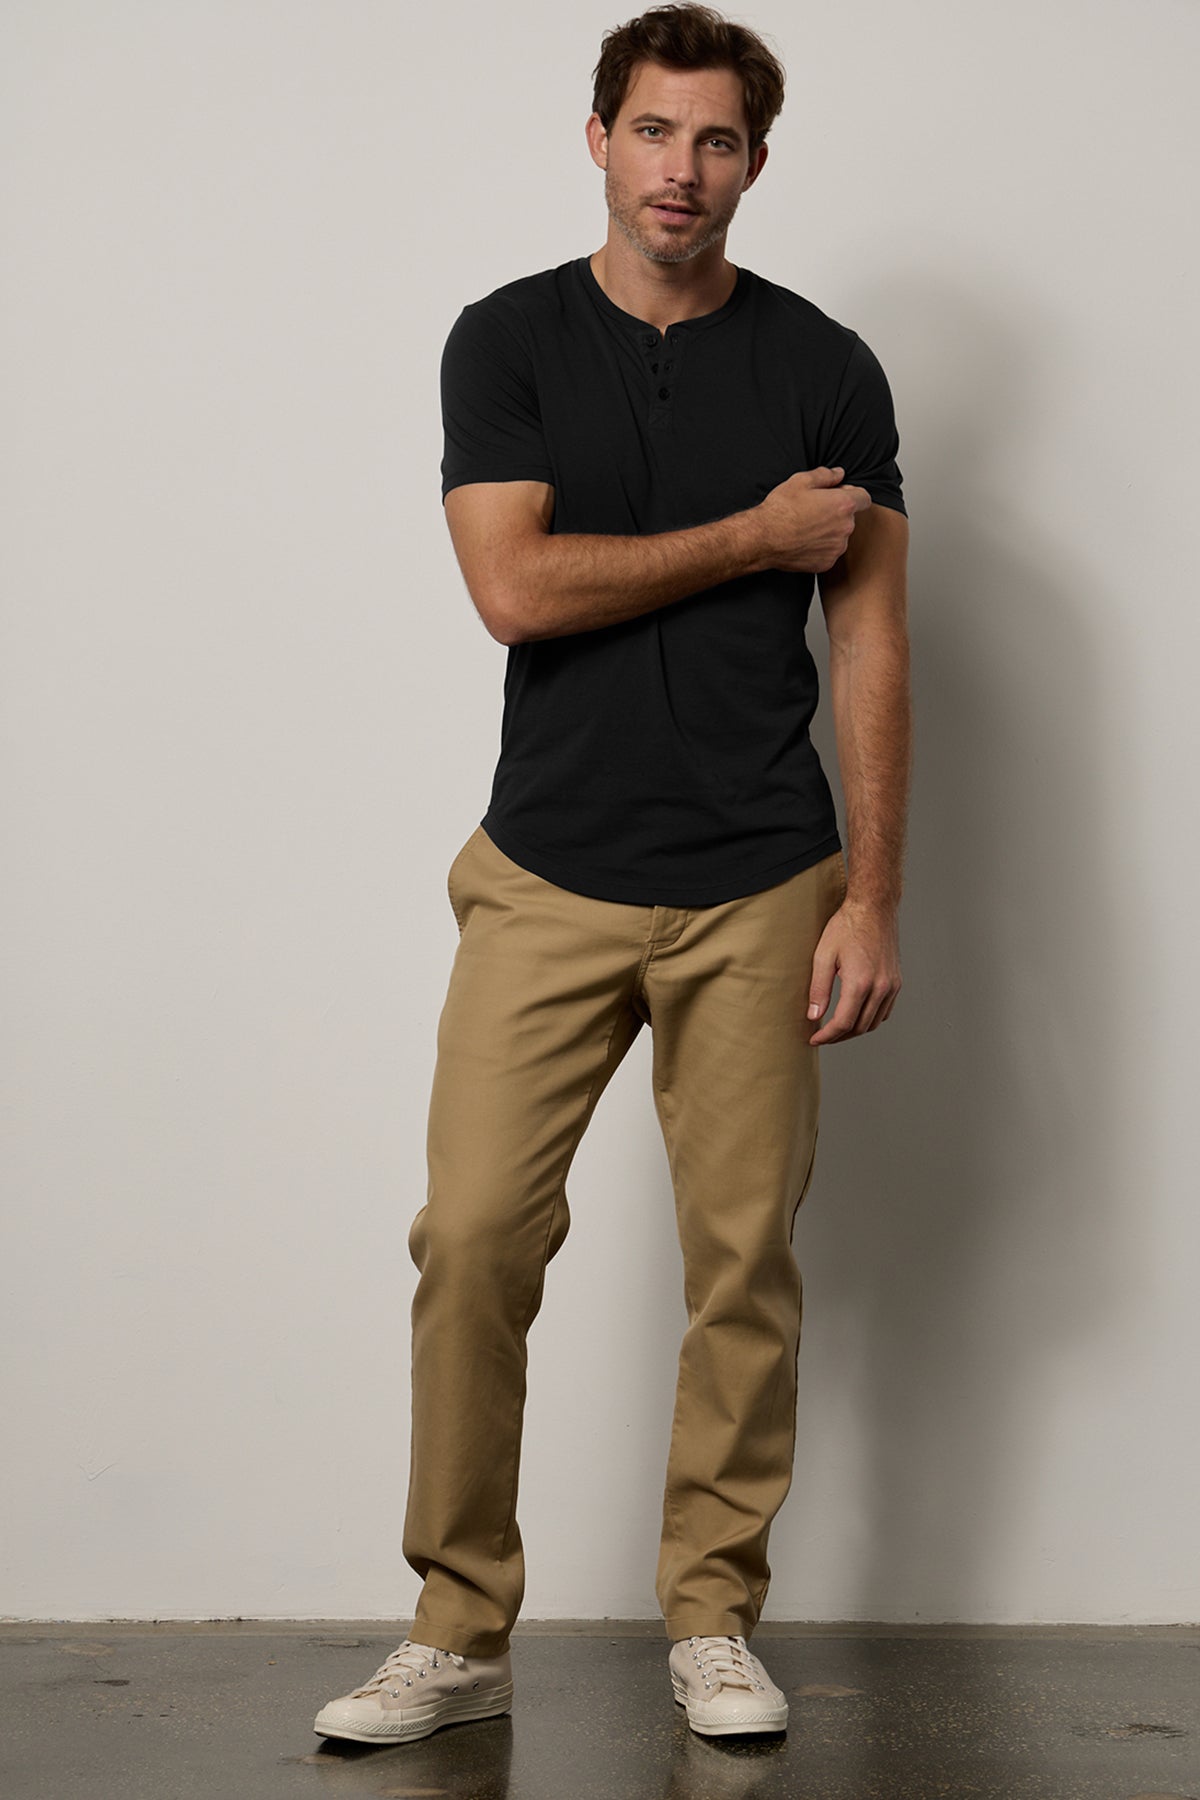 Man in black Fulton Henley and beige pants standing with one arm crossed over his chest, against a gray background.-25943764205761